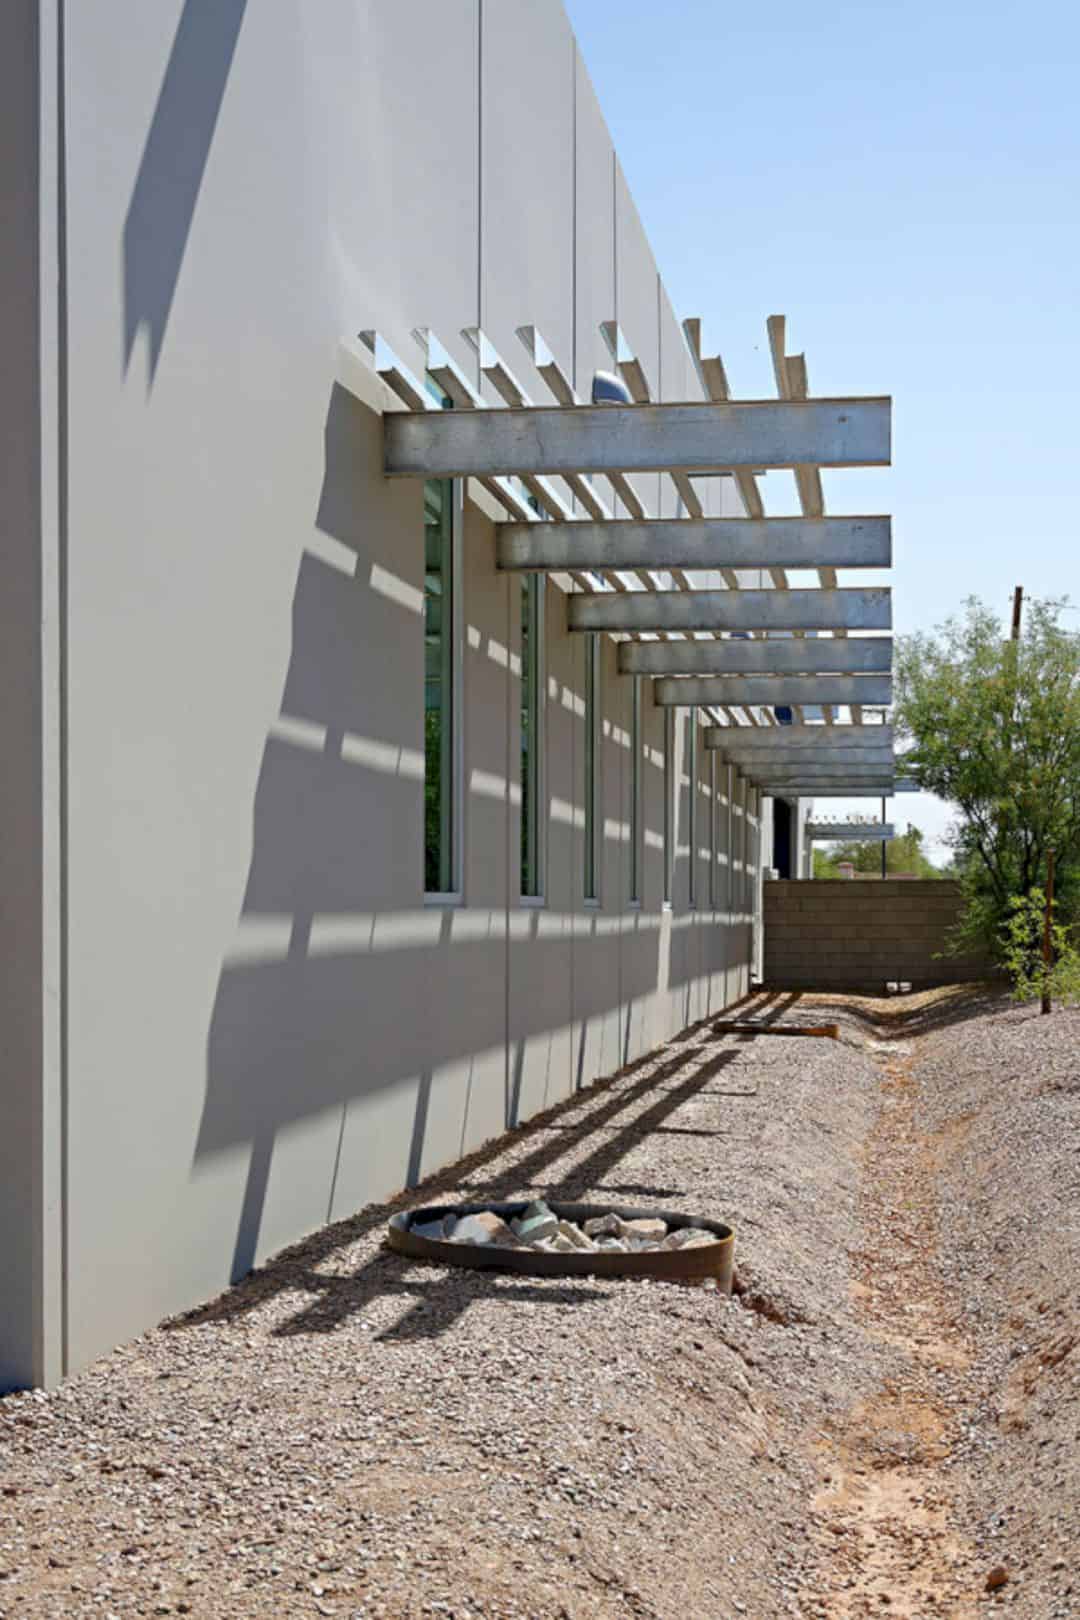 Ssa Tucson The Tilt Up Concrete Facility In Tucsons Welcoming Environment 8